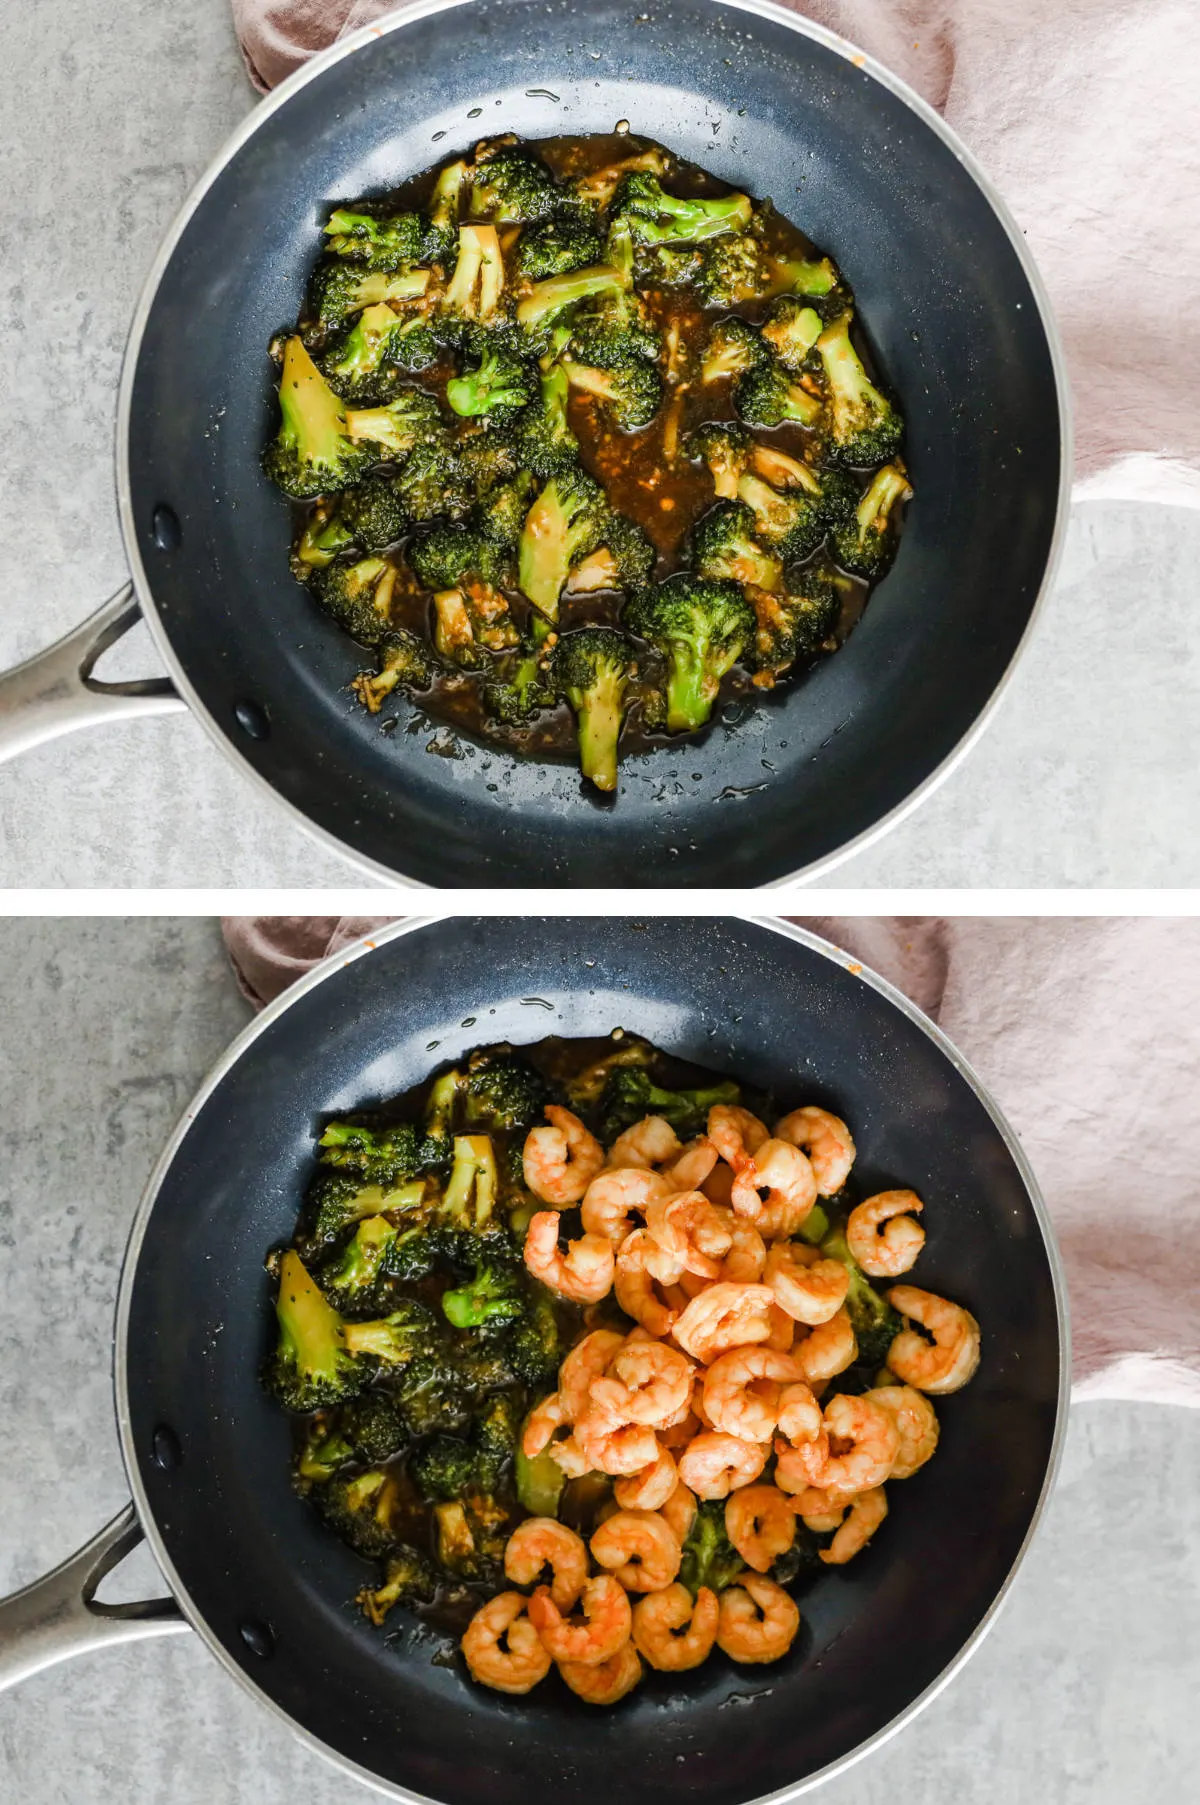 Two overhead images in one: 1. Broccoli is cooked in the sauce in a frying pan. 2. Shrimp are added to the broccoli. 